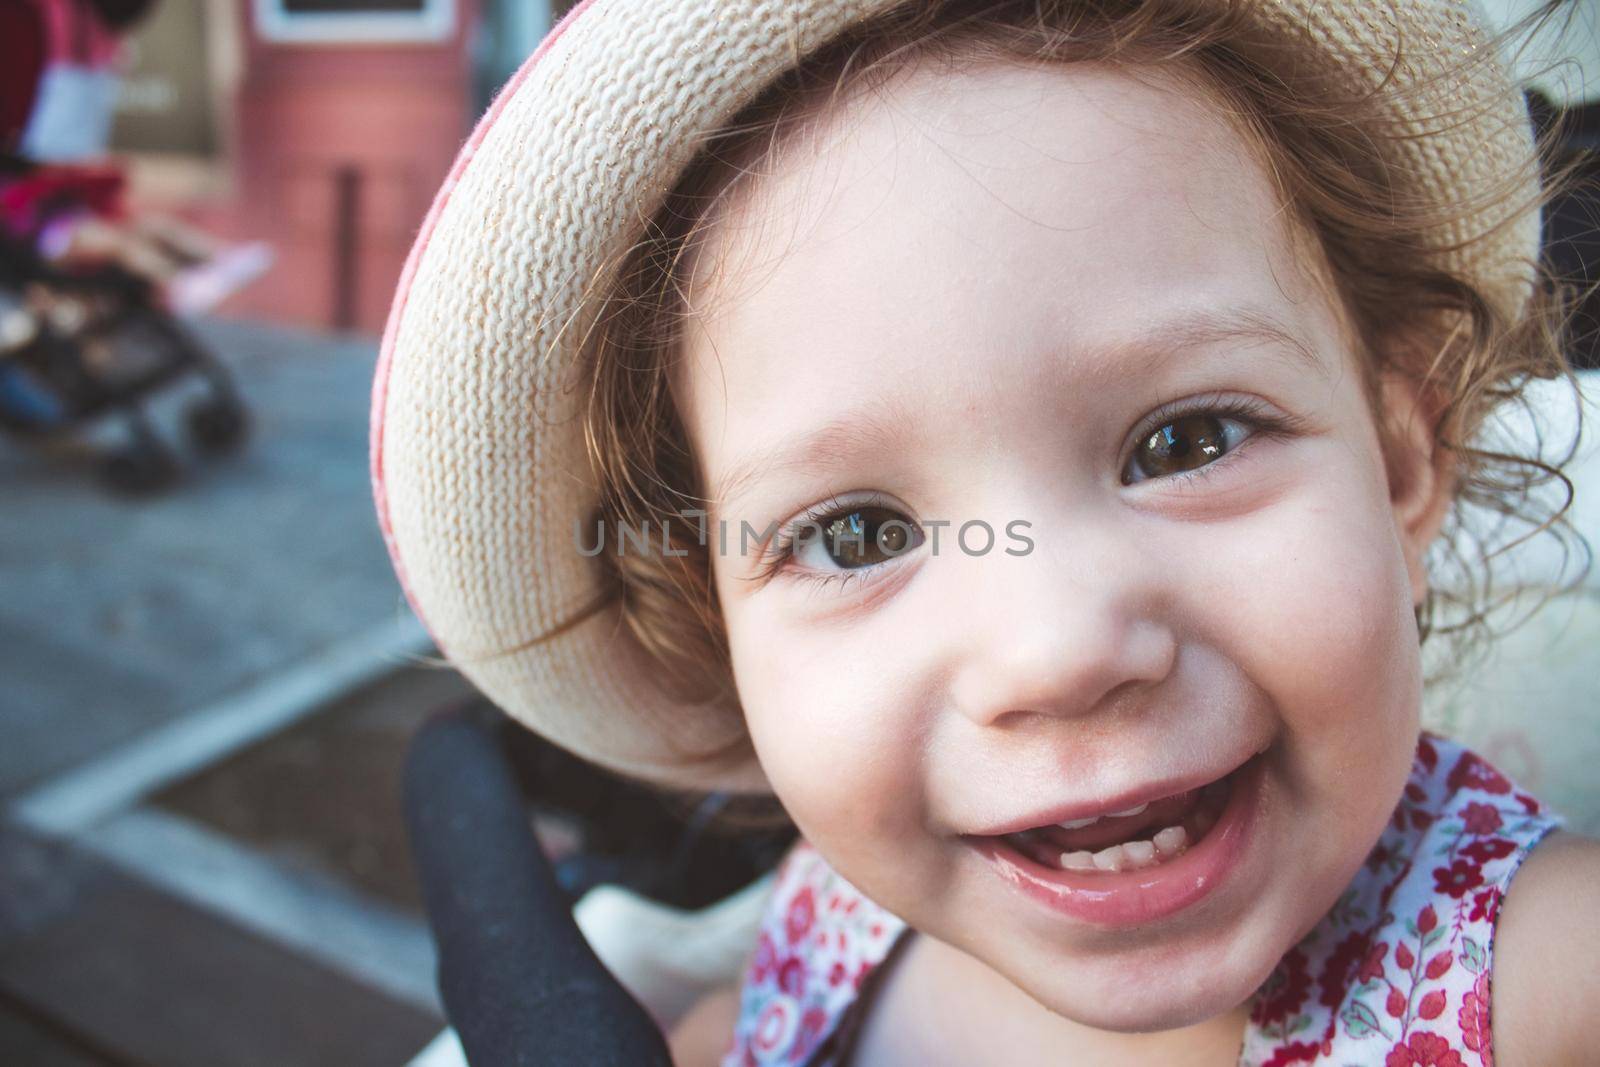 Close-up portrait of cute baby girl looking at camera smiling and wearing a hat by tennesseewitney